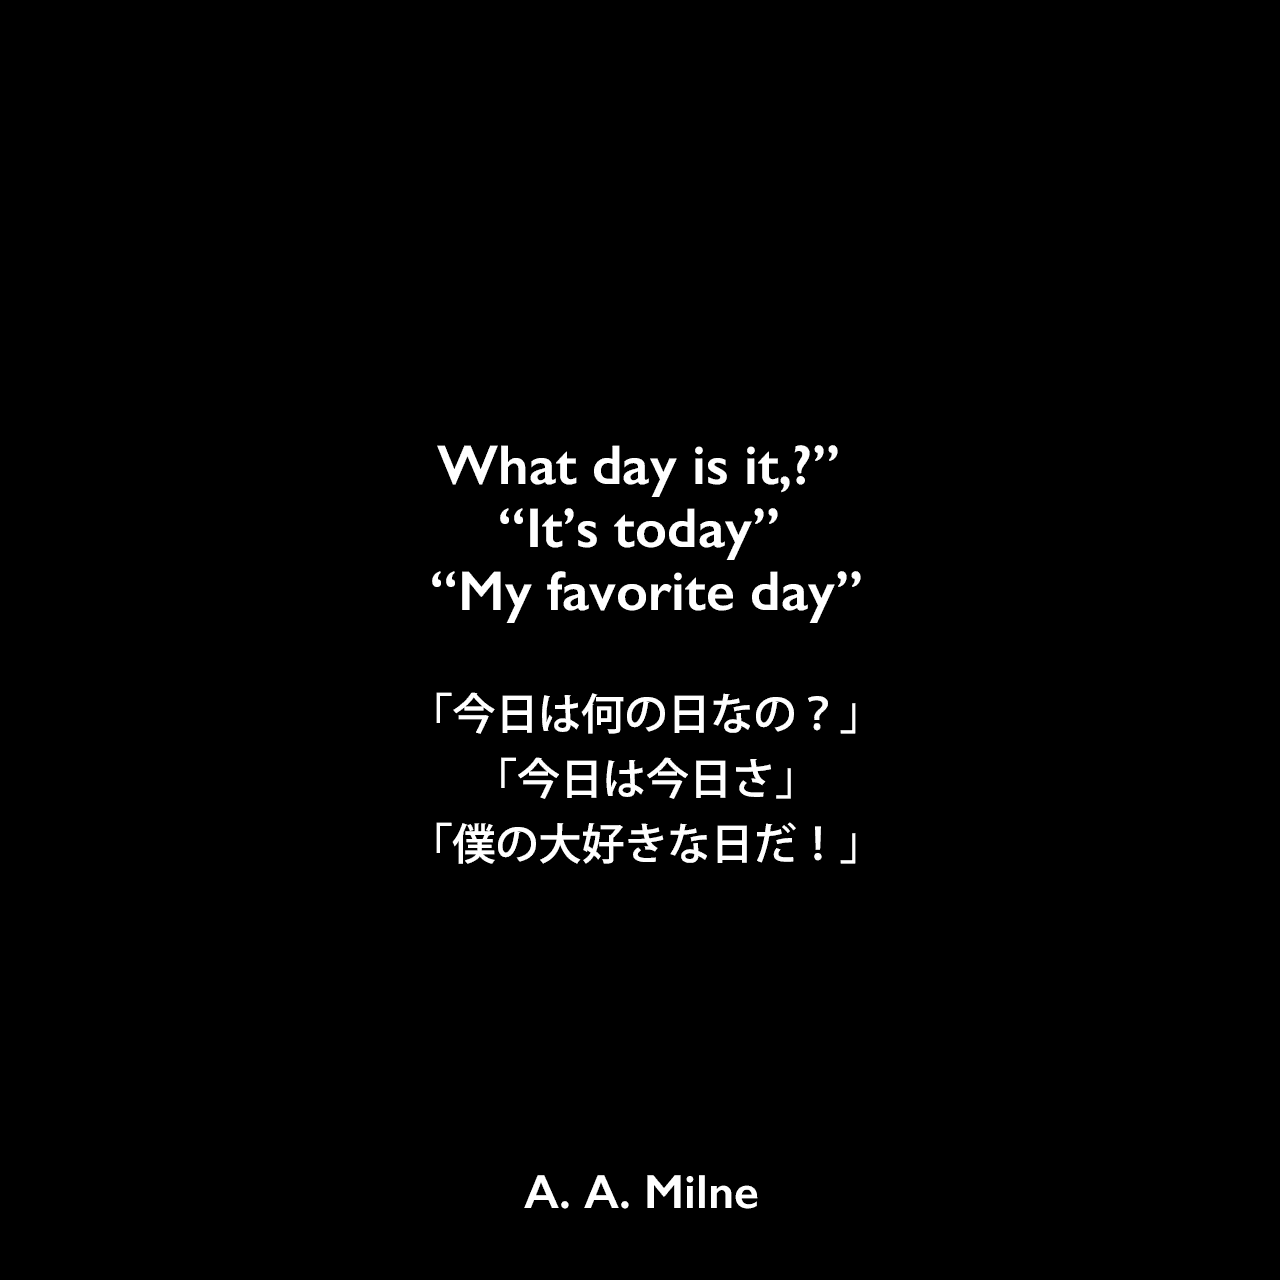 What day is it,?” “It’s today” “My favorite day”「今日は何の日なの？」「今日は今日さ」「僕の大好きな日だ！」A. A. Milne